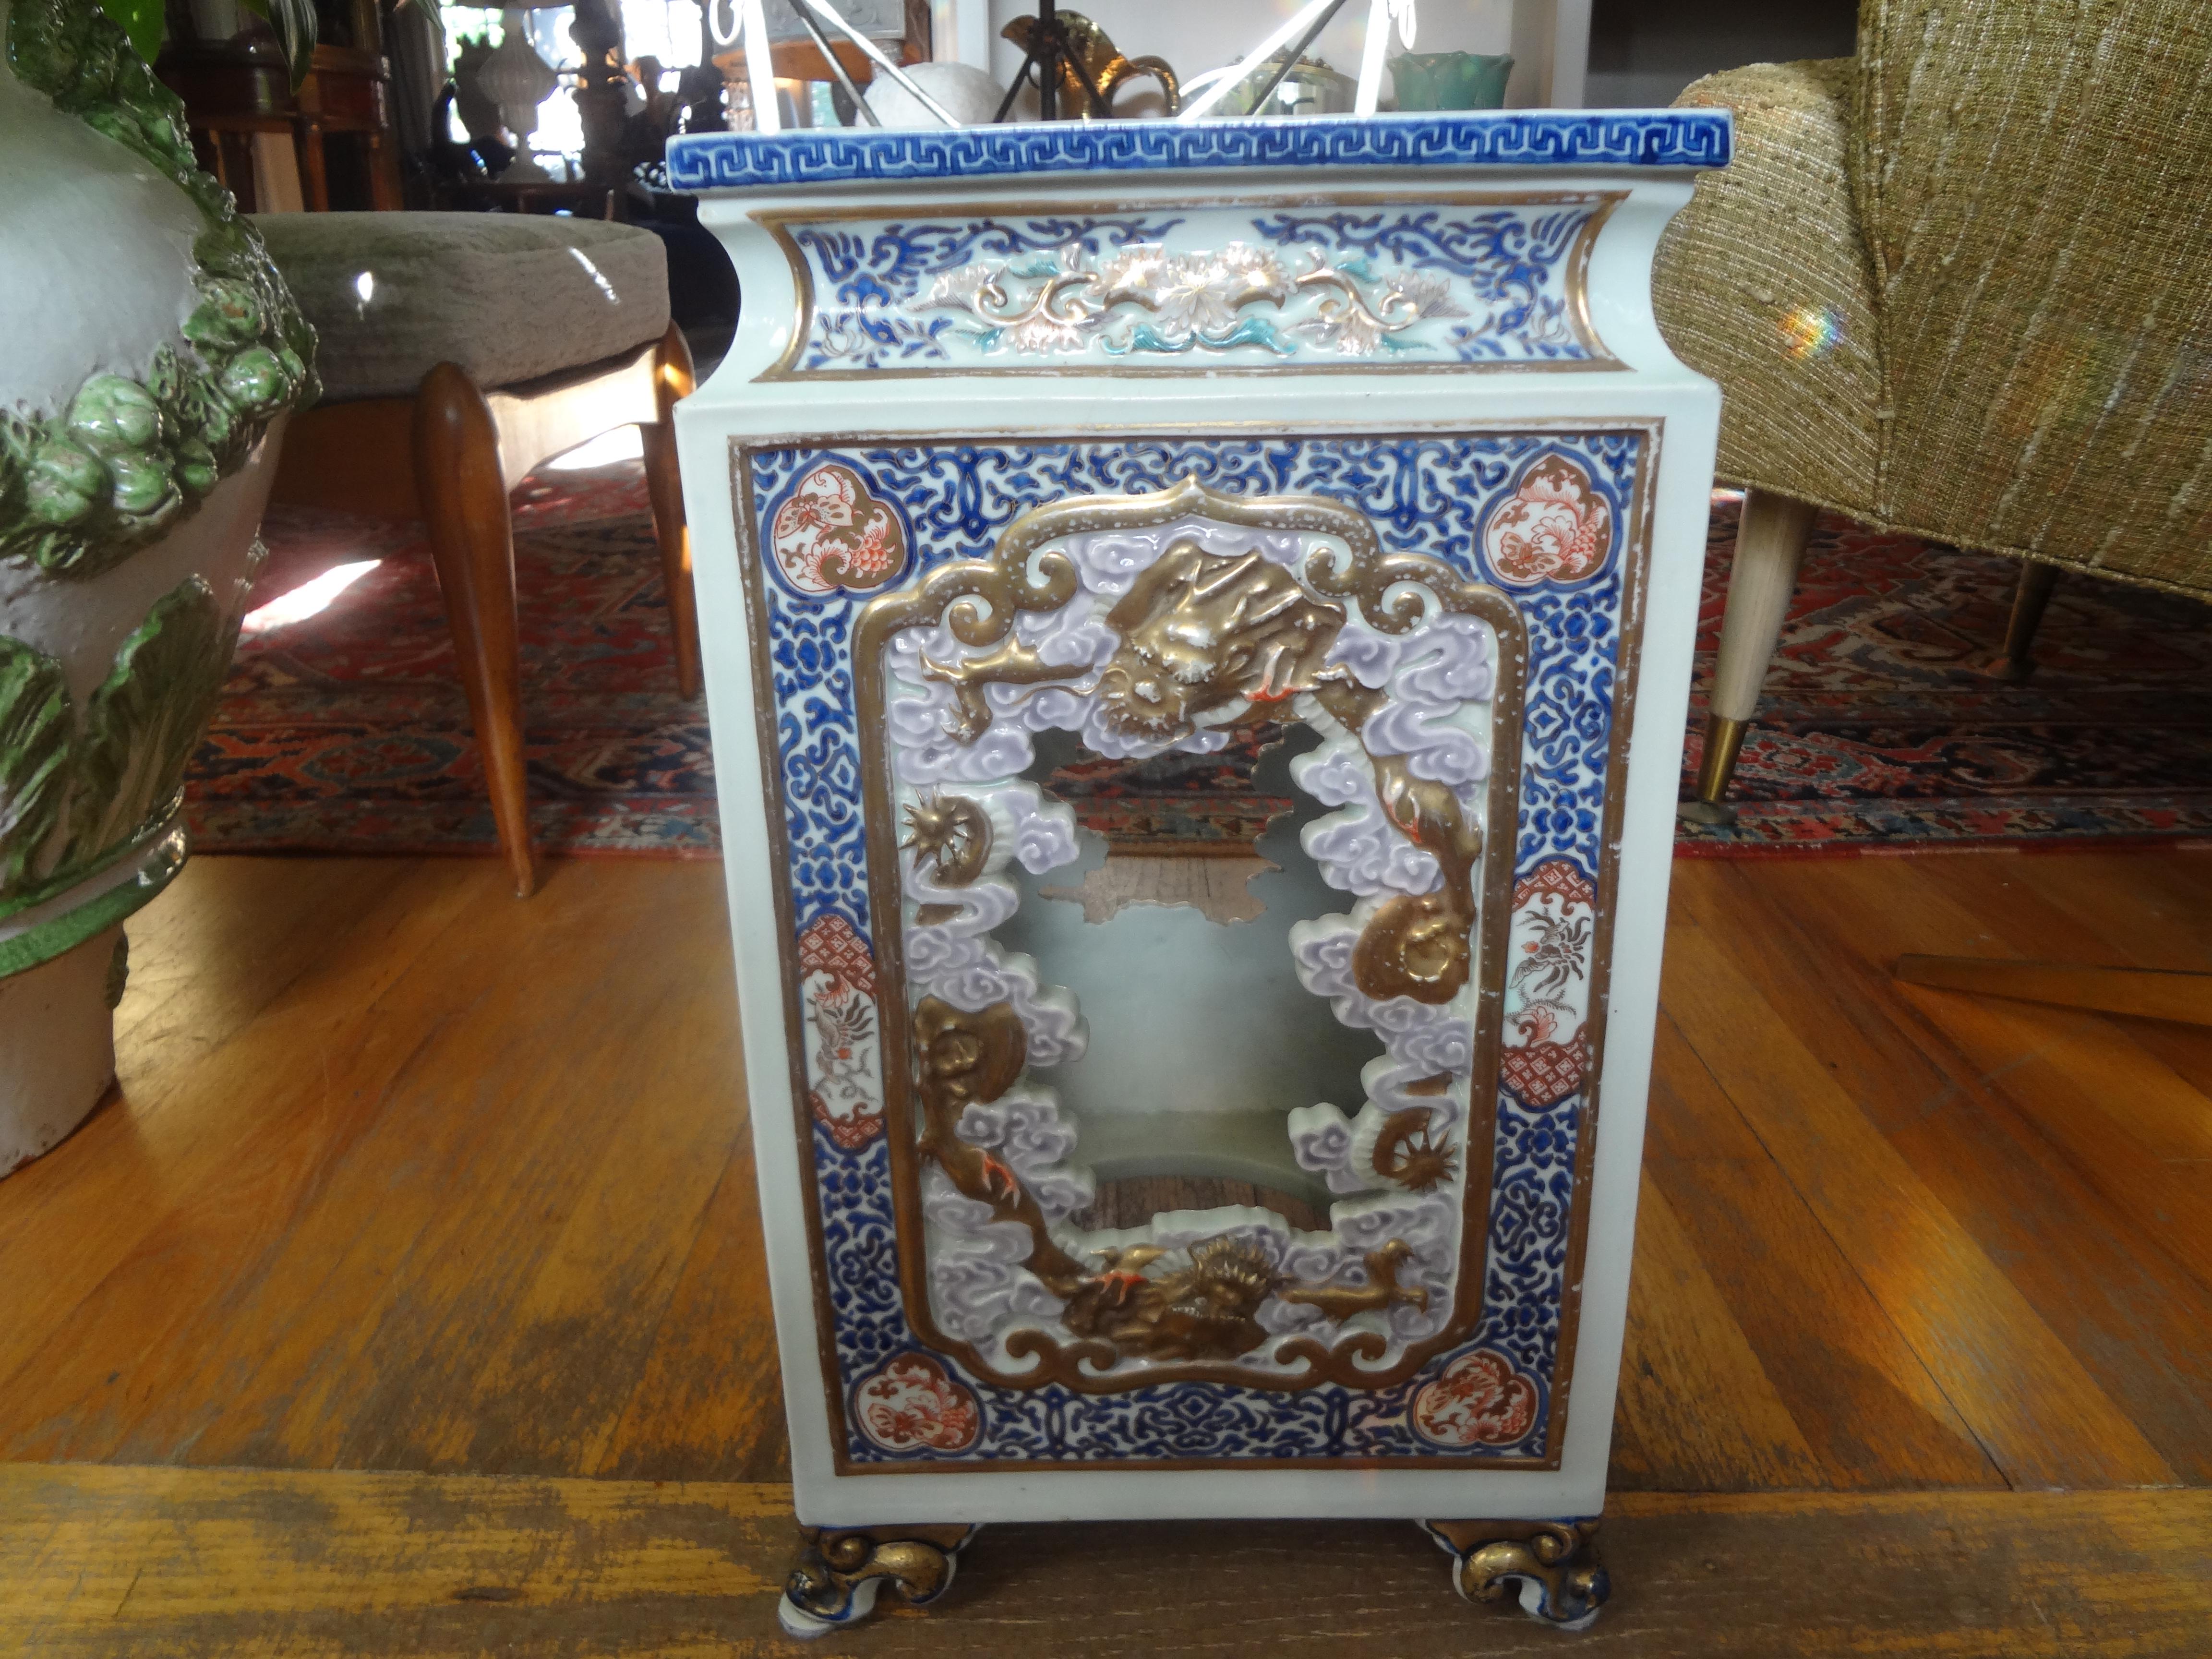 Stunning 19th century Japanese Meiji period hand decorated porcelain garden seat, garden stool or table. This antique Japanese garden seat is beautifully detailed with gilt trimmed feet and Greek key accents. This would make a perfect side table.